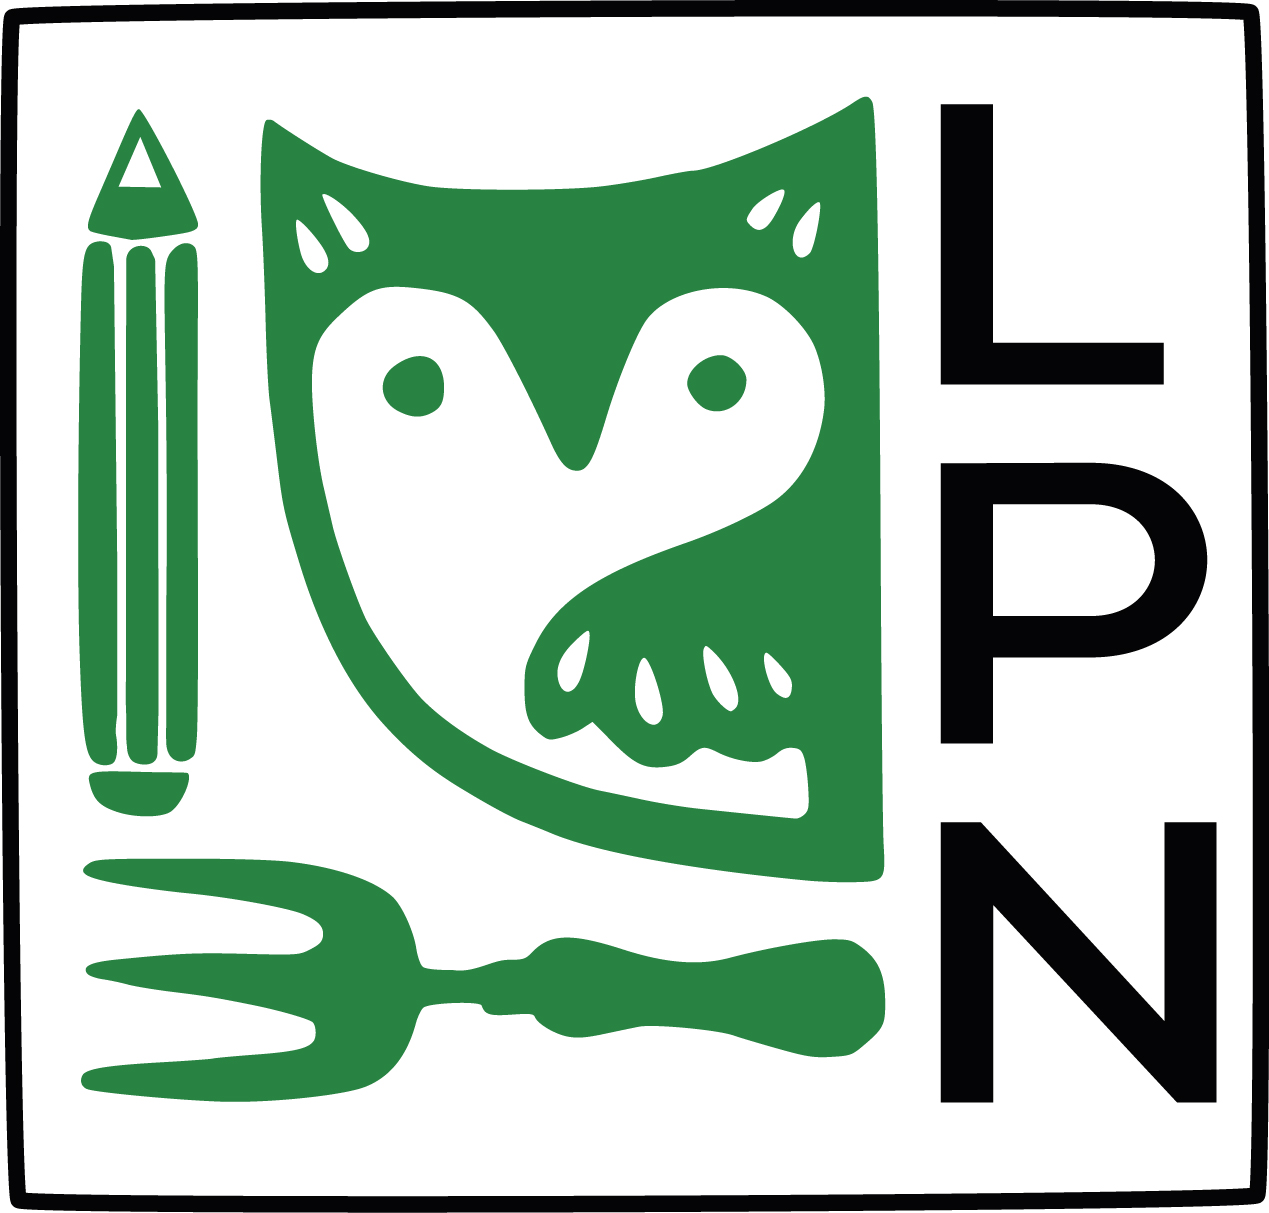 Leeds Permaculture Network logo shows an owl for Leeds, a pencil for design and a trowel for practical action